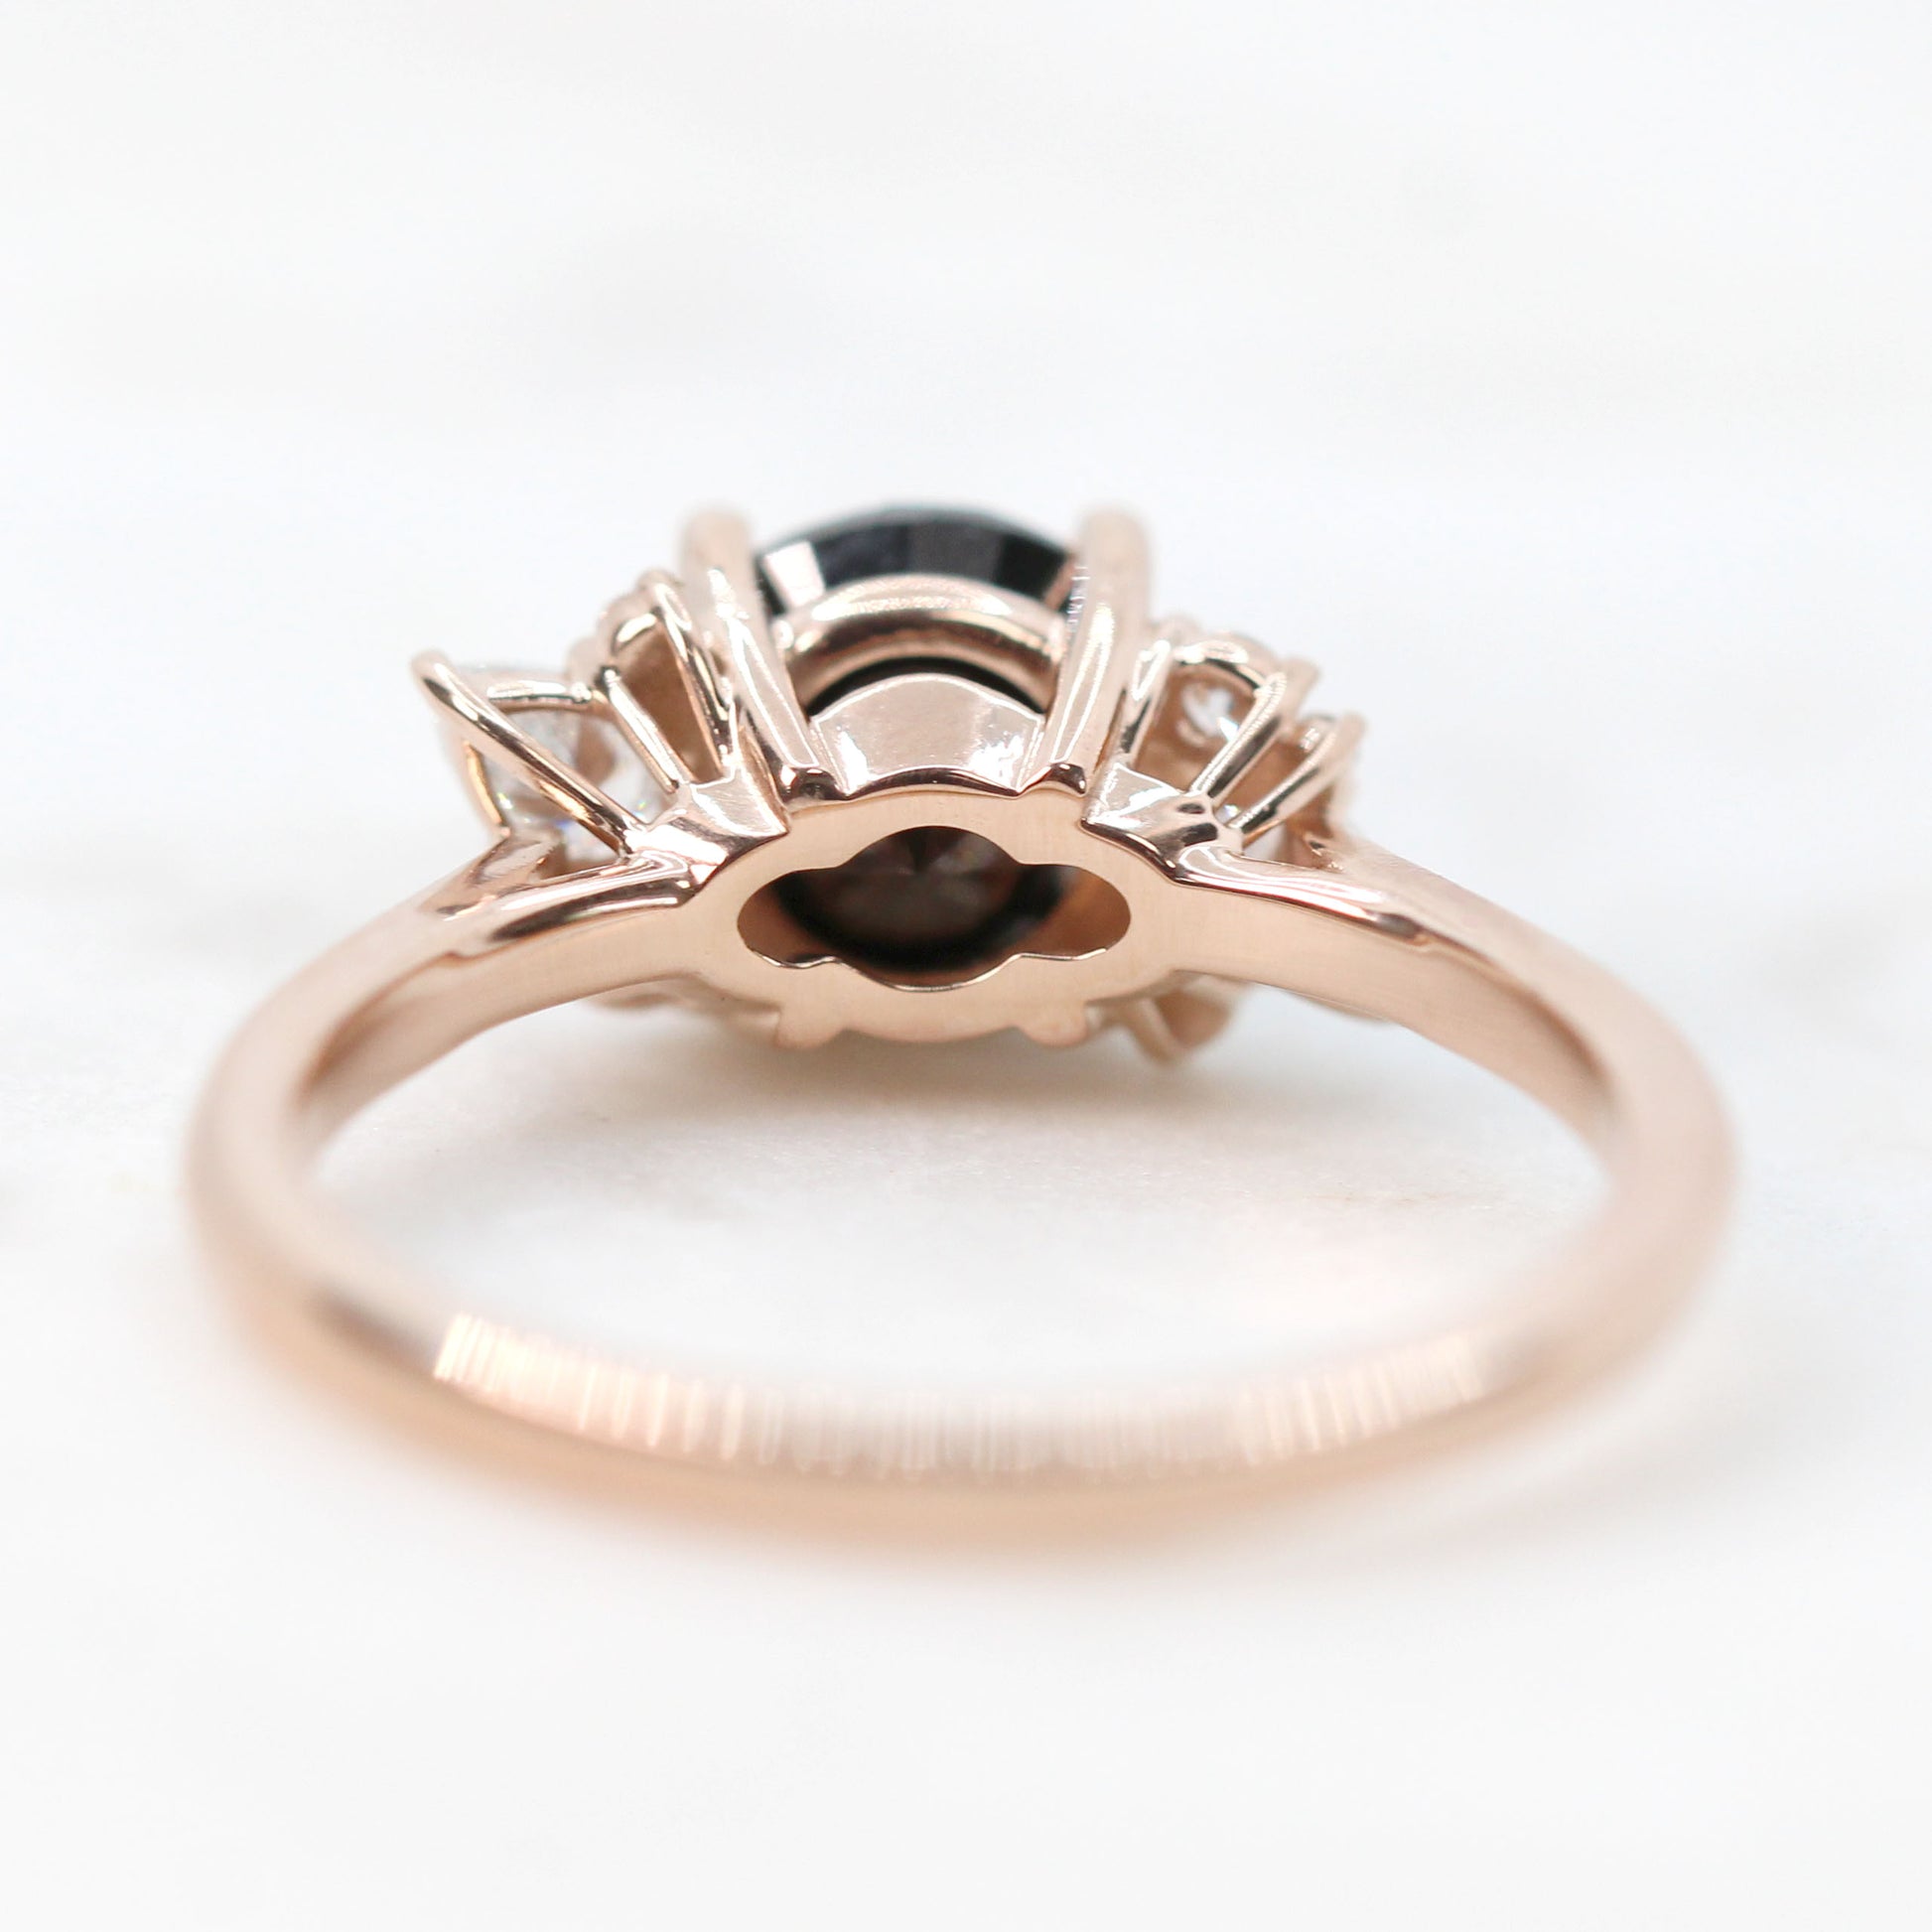 Sable Ring with a 2.20 Carat Round Black Celestial Diamond and White Accent Diamonds in 14k Rose Gold - Ready to Size and Ship - Midwinter Co. Alternative Bridal Rings and Modern Fine Jewelry